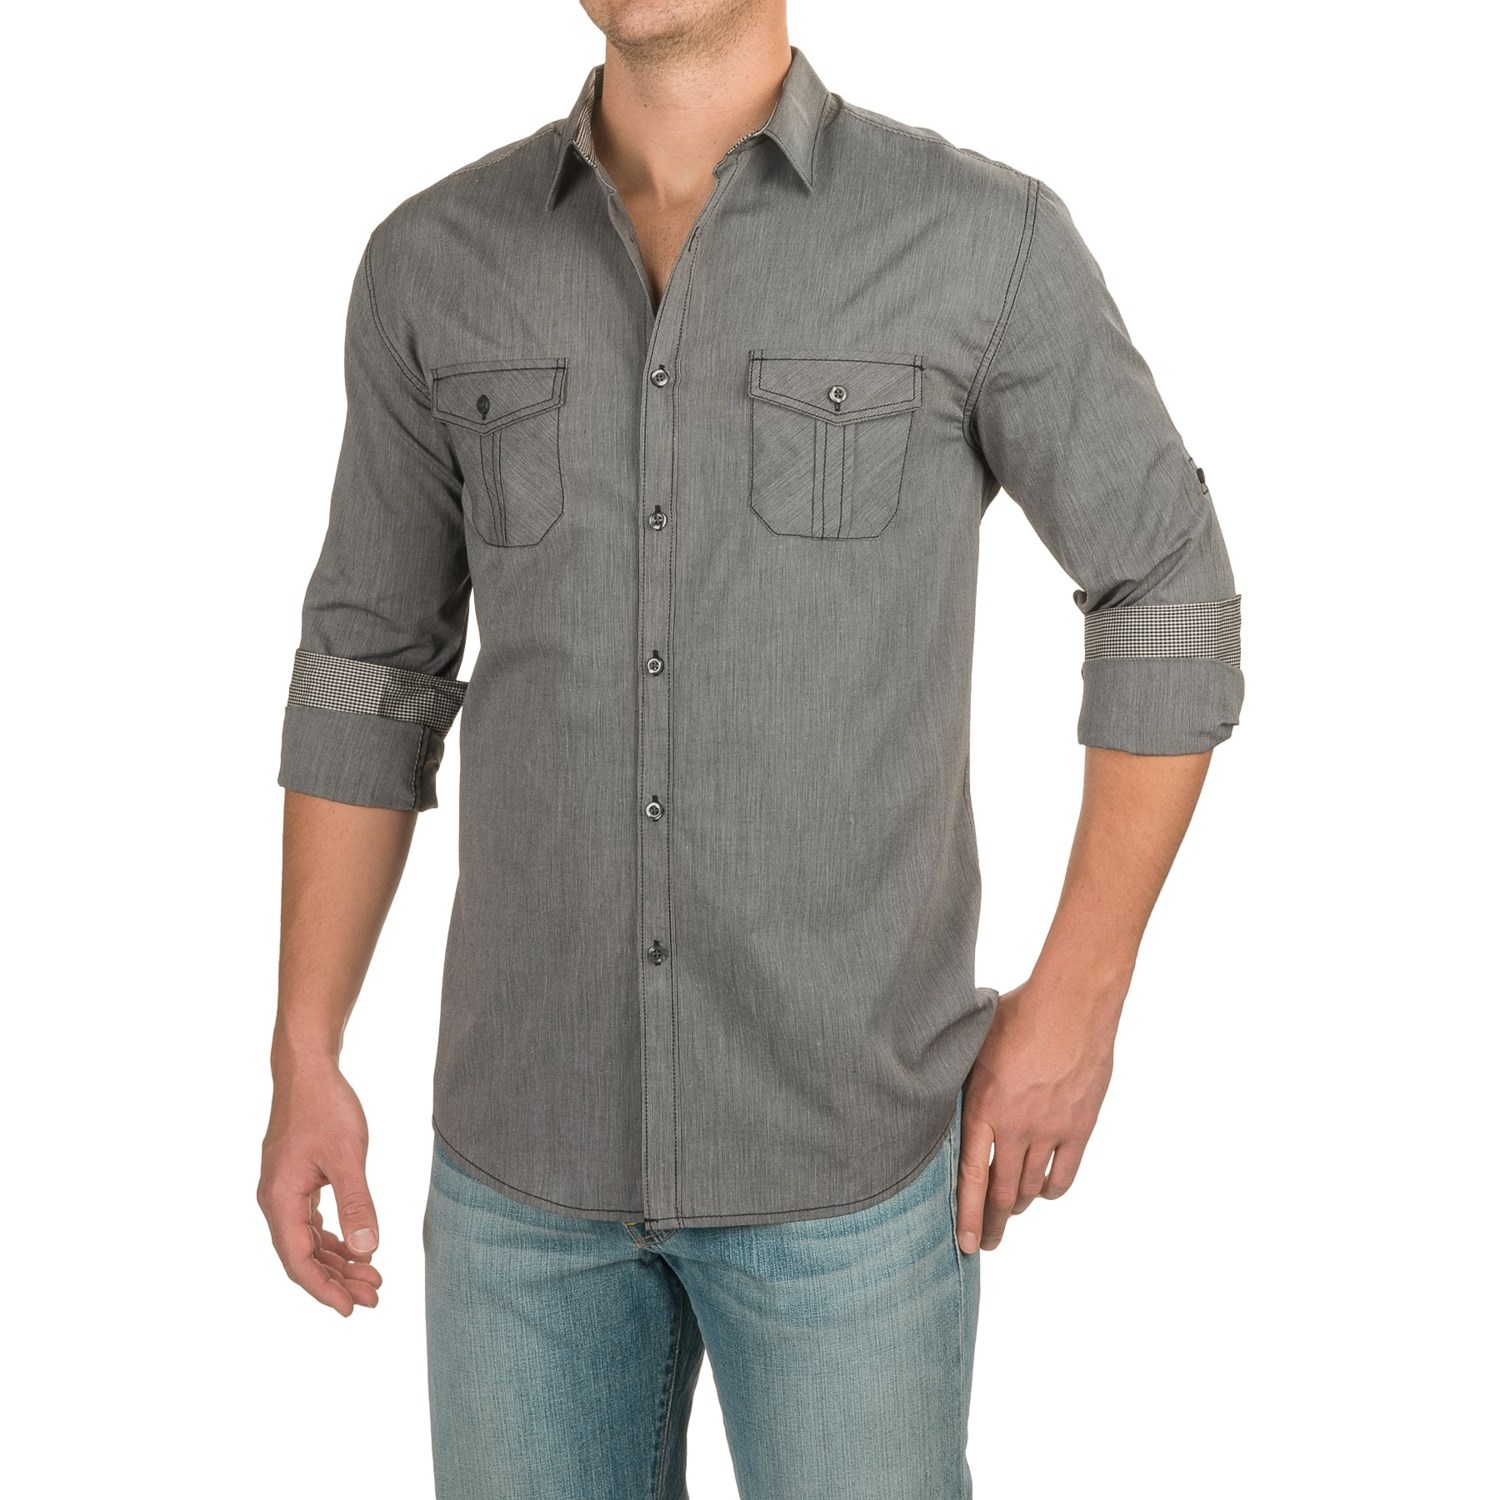 Collared Two-Pocket Shirt (For Men) - Save 65%